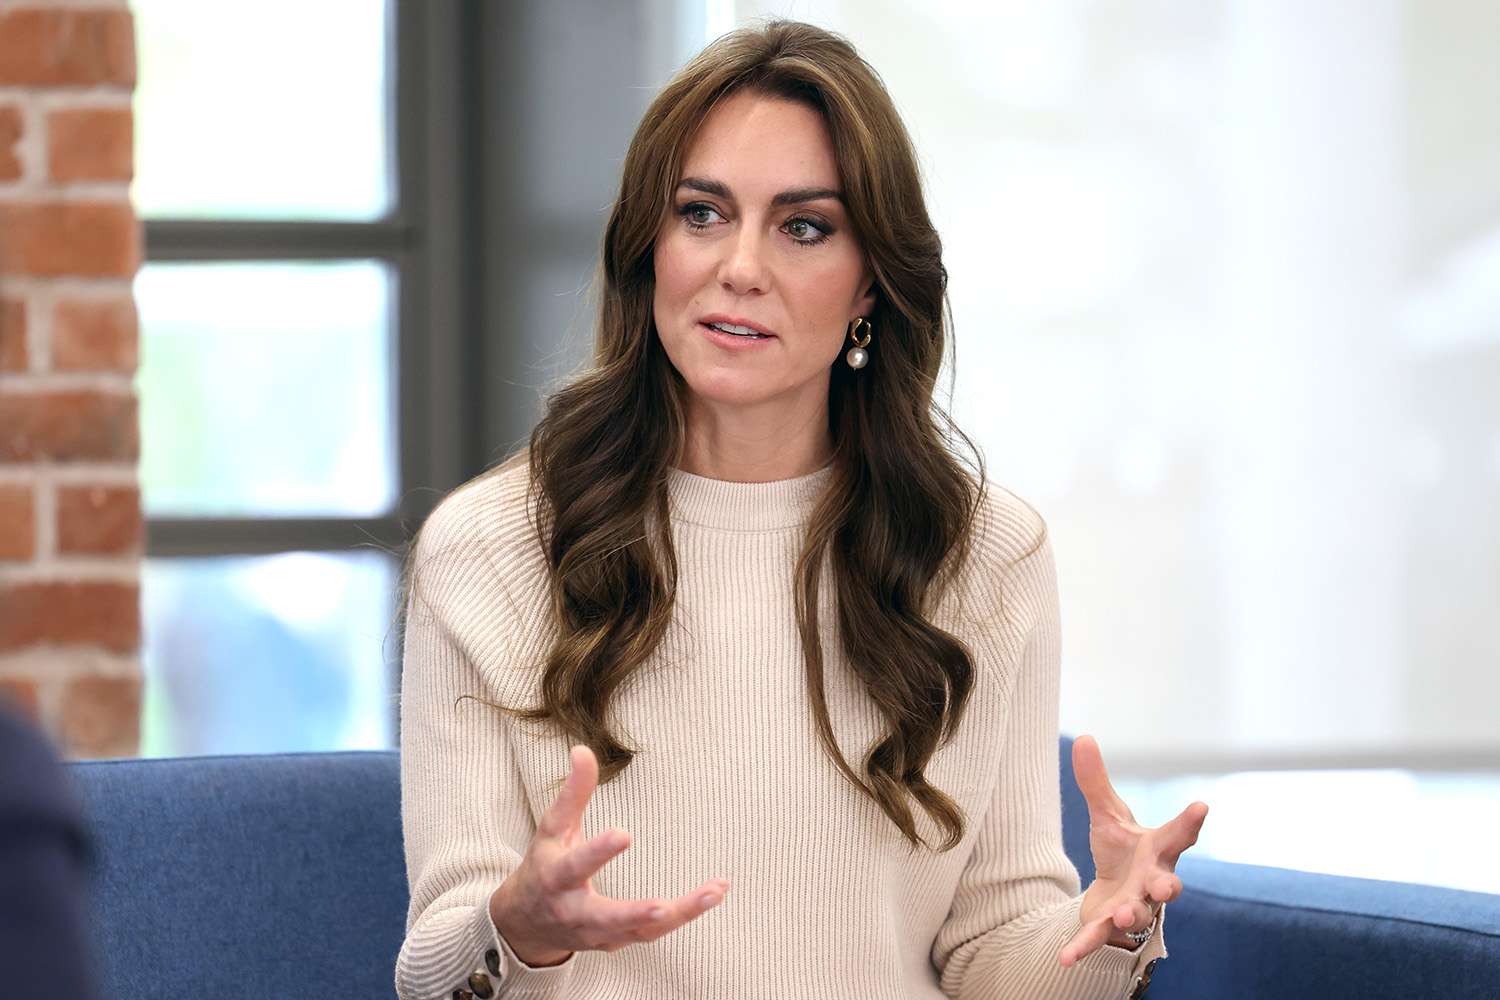 Kate Middleton's Health Scare: How Her Mom Became Her Rock During Recovery